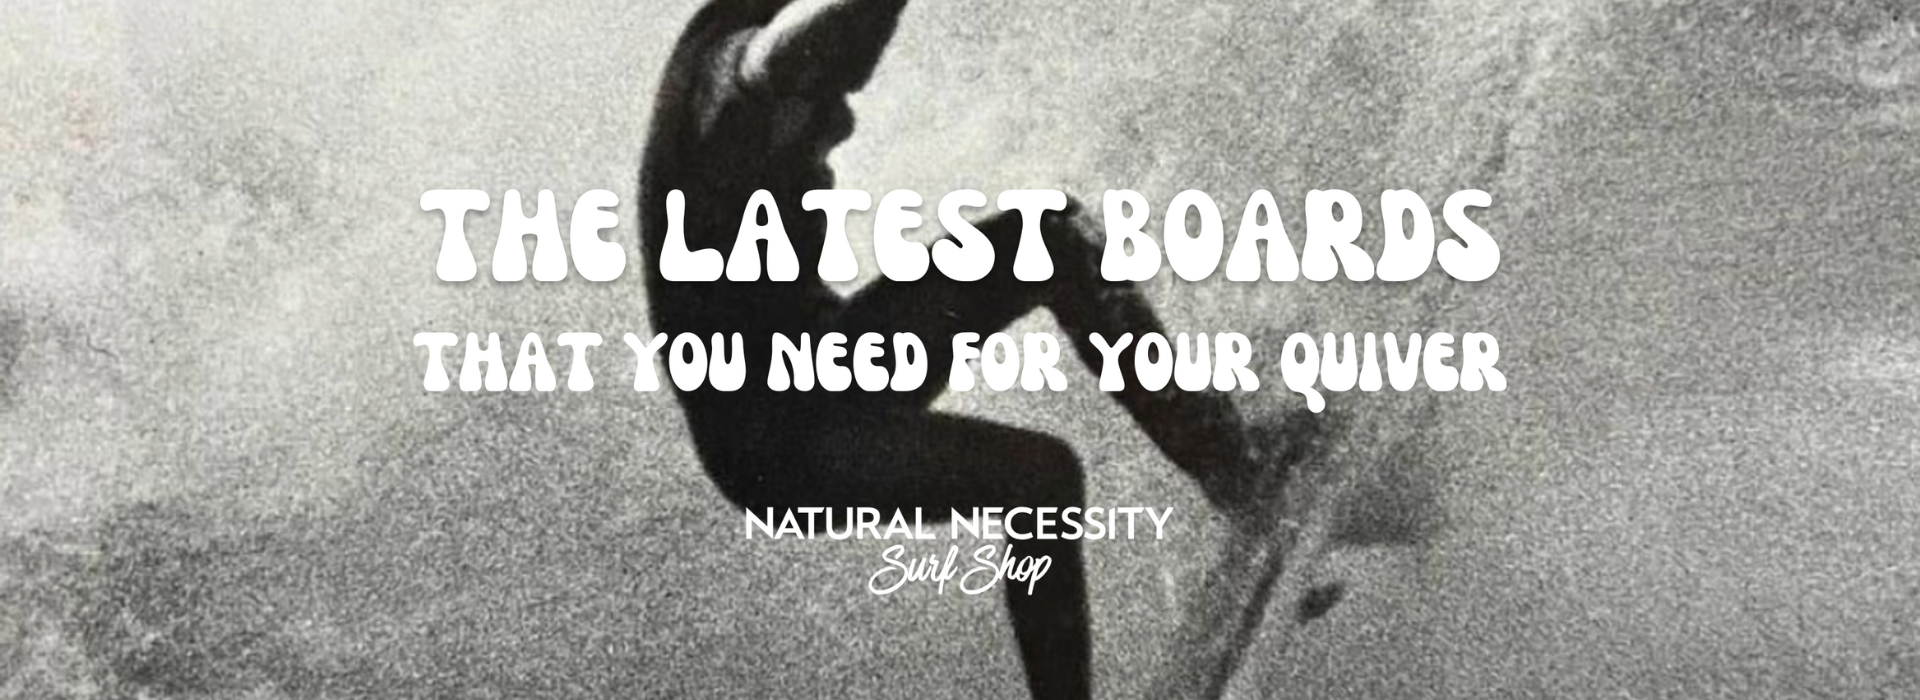 The Latest Boards You Need in Your Quiver